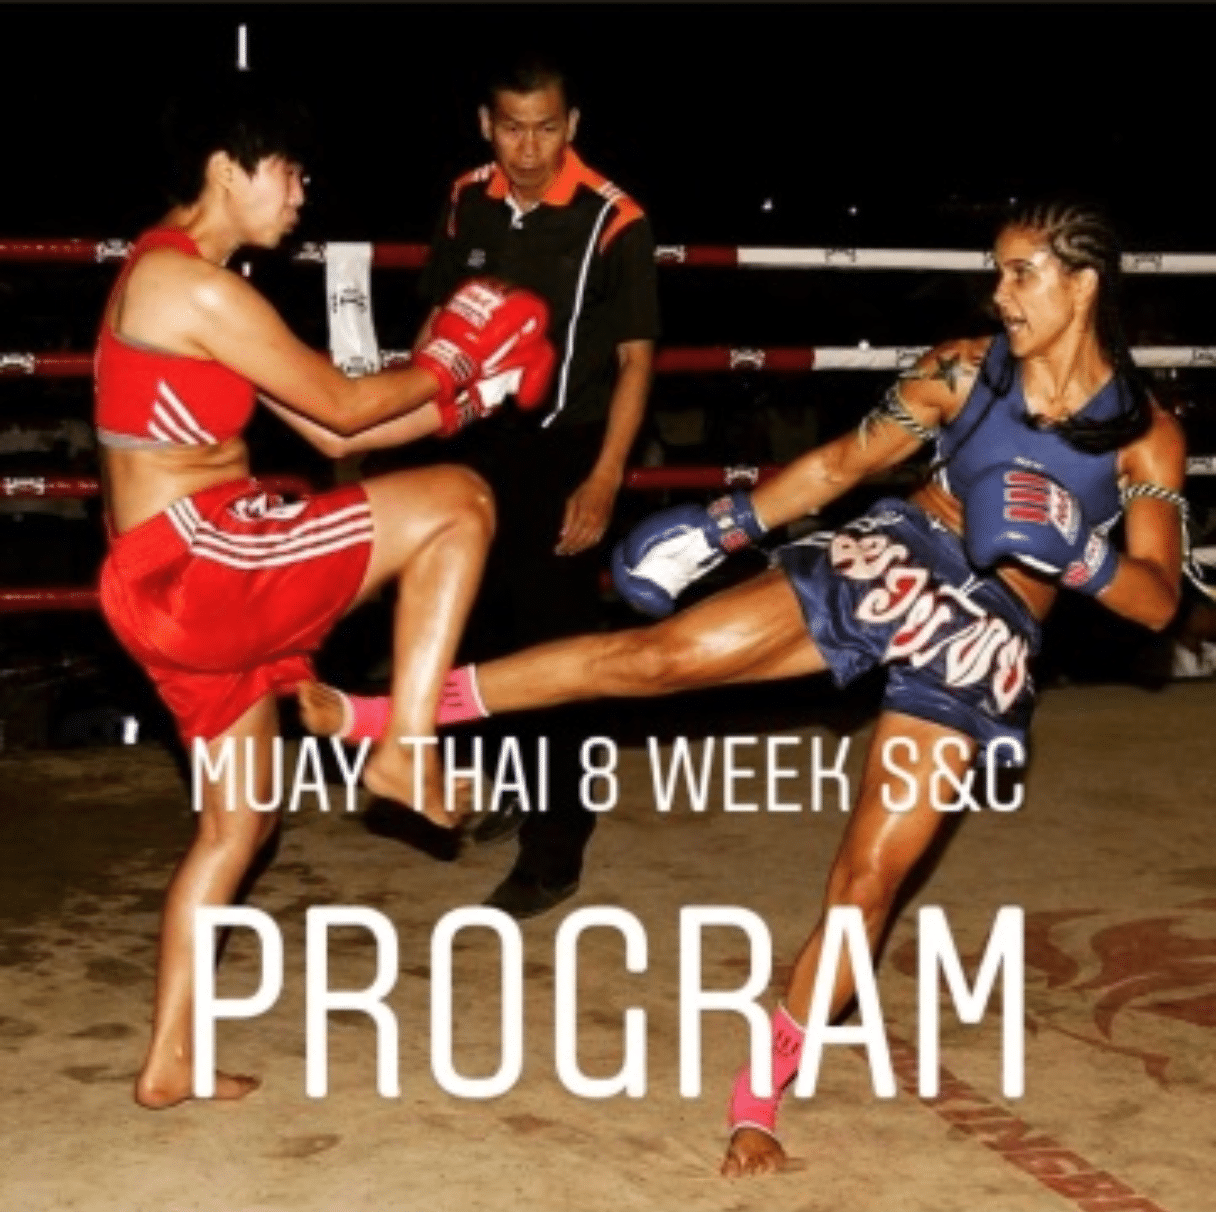 Muay Thai Workout: A Punch, a Kick and a Knee to De-Stress - WSJ